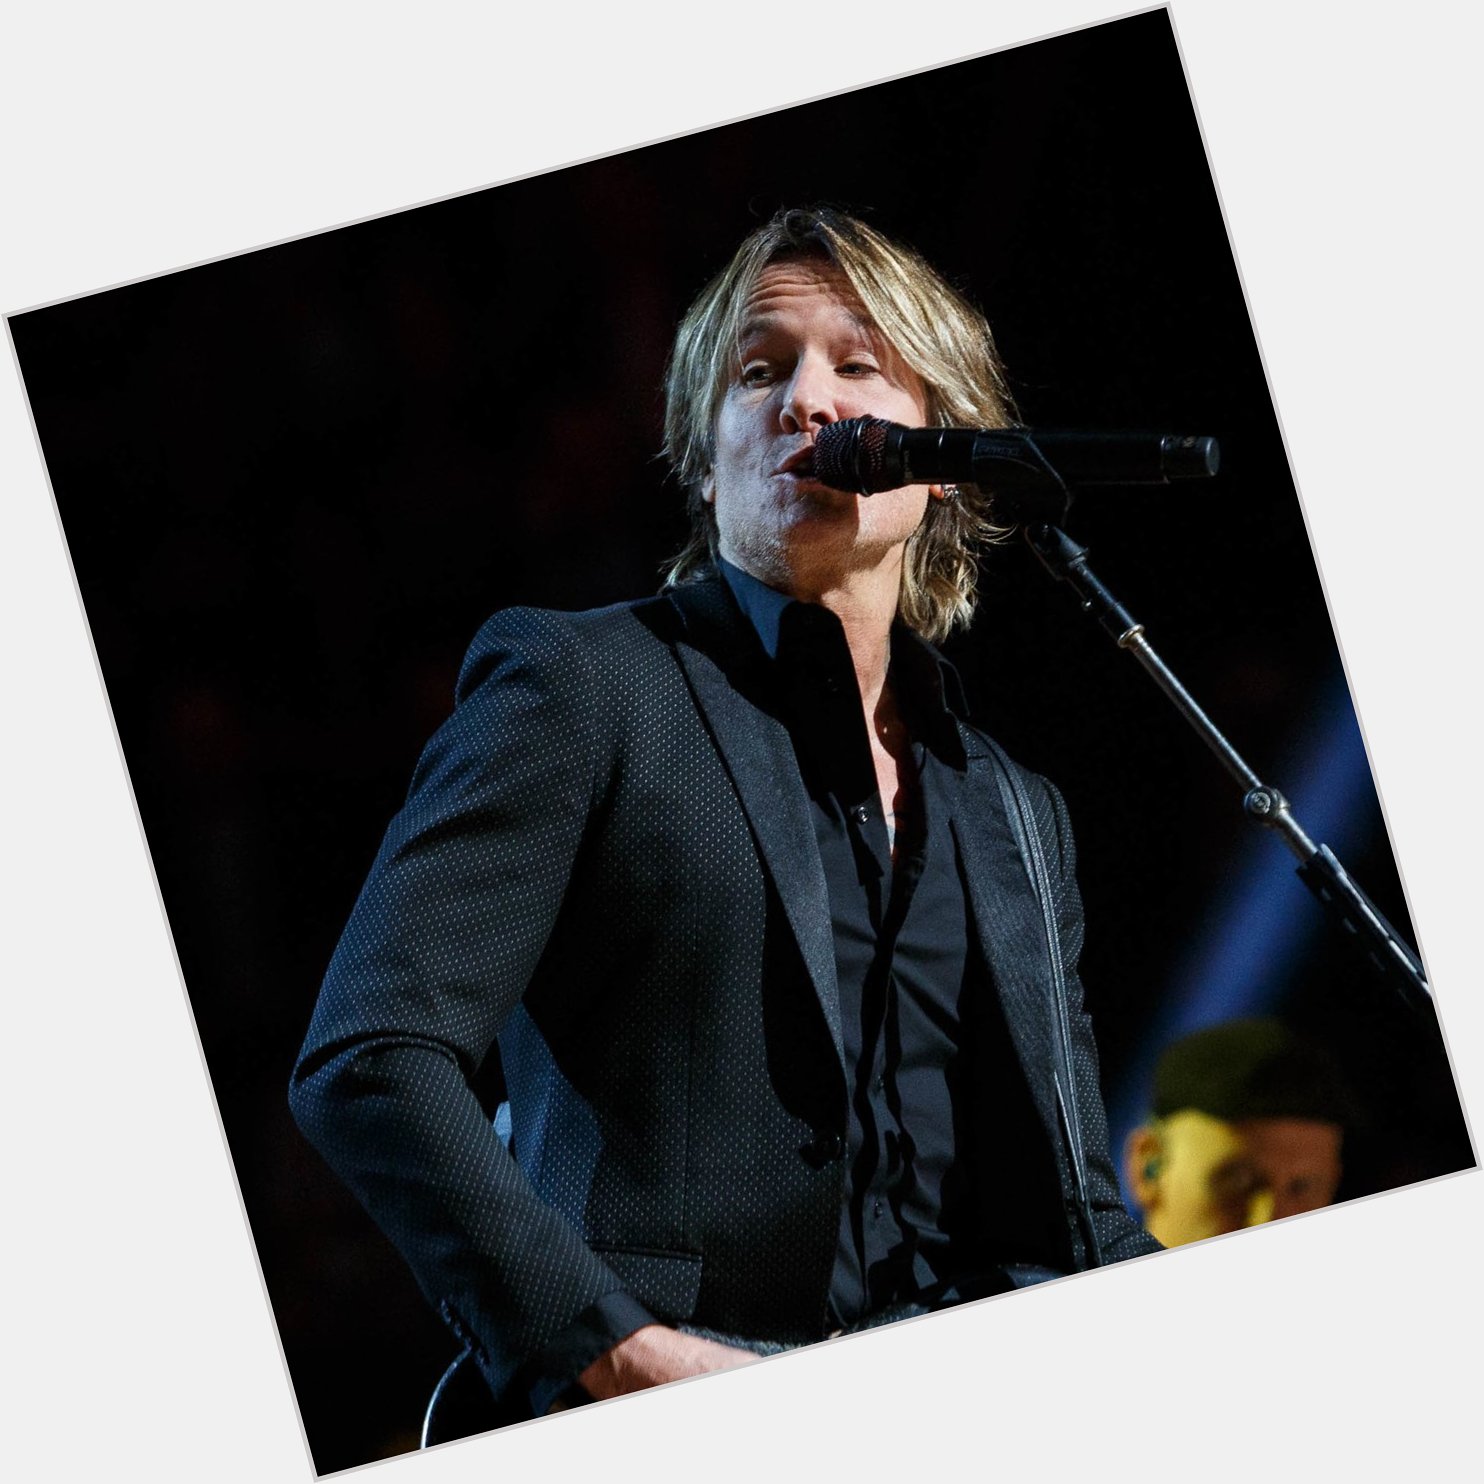 Happy Birthday to the wonderful Keith Urban. 54 today and still making fantastic music! 